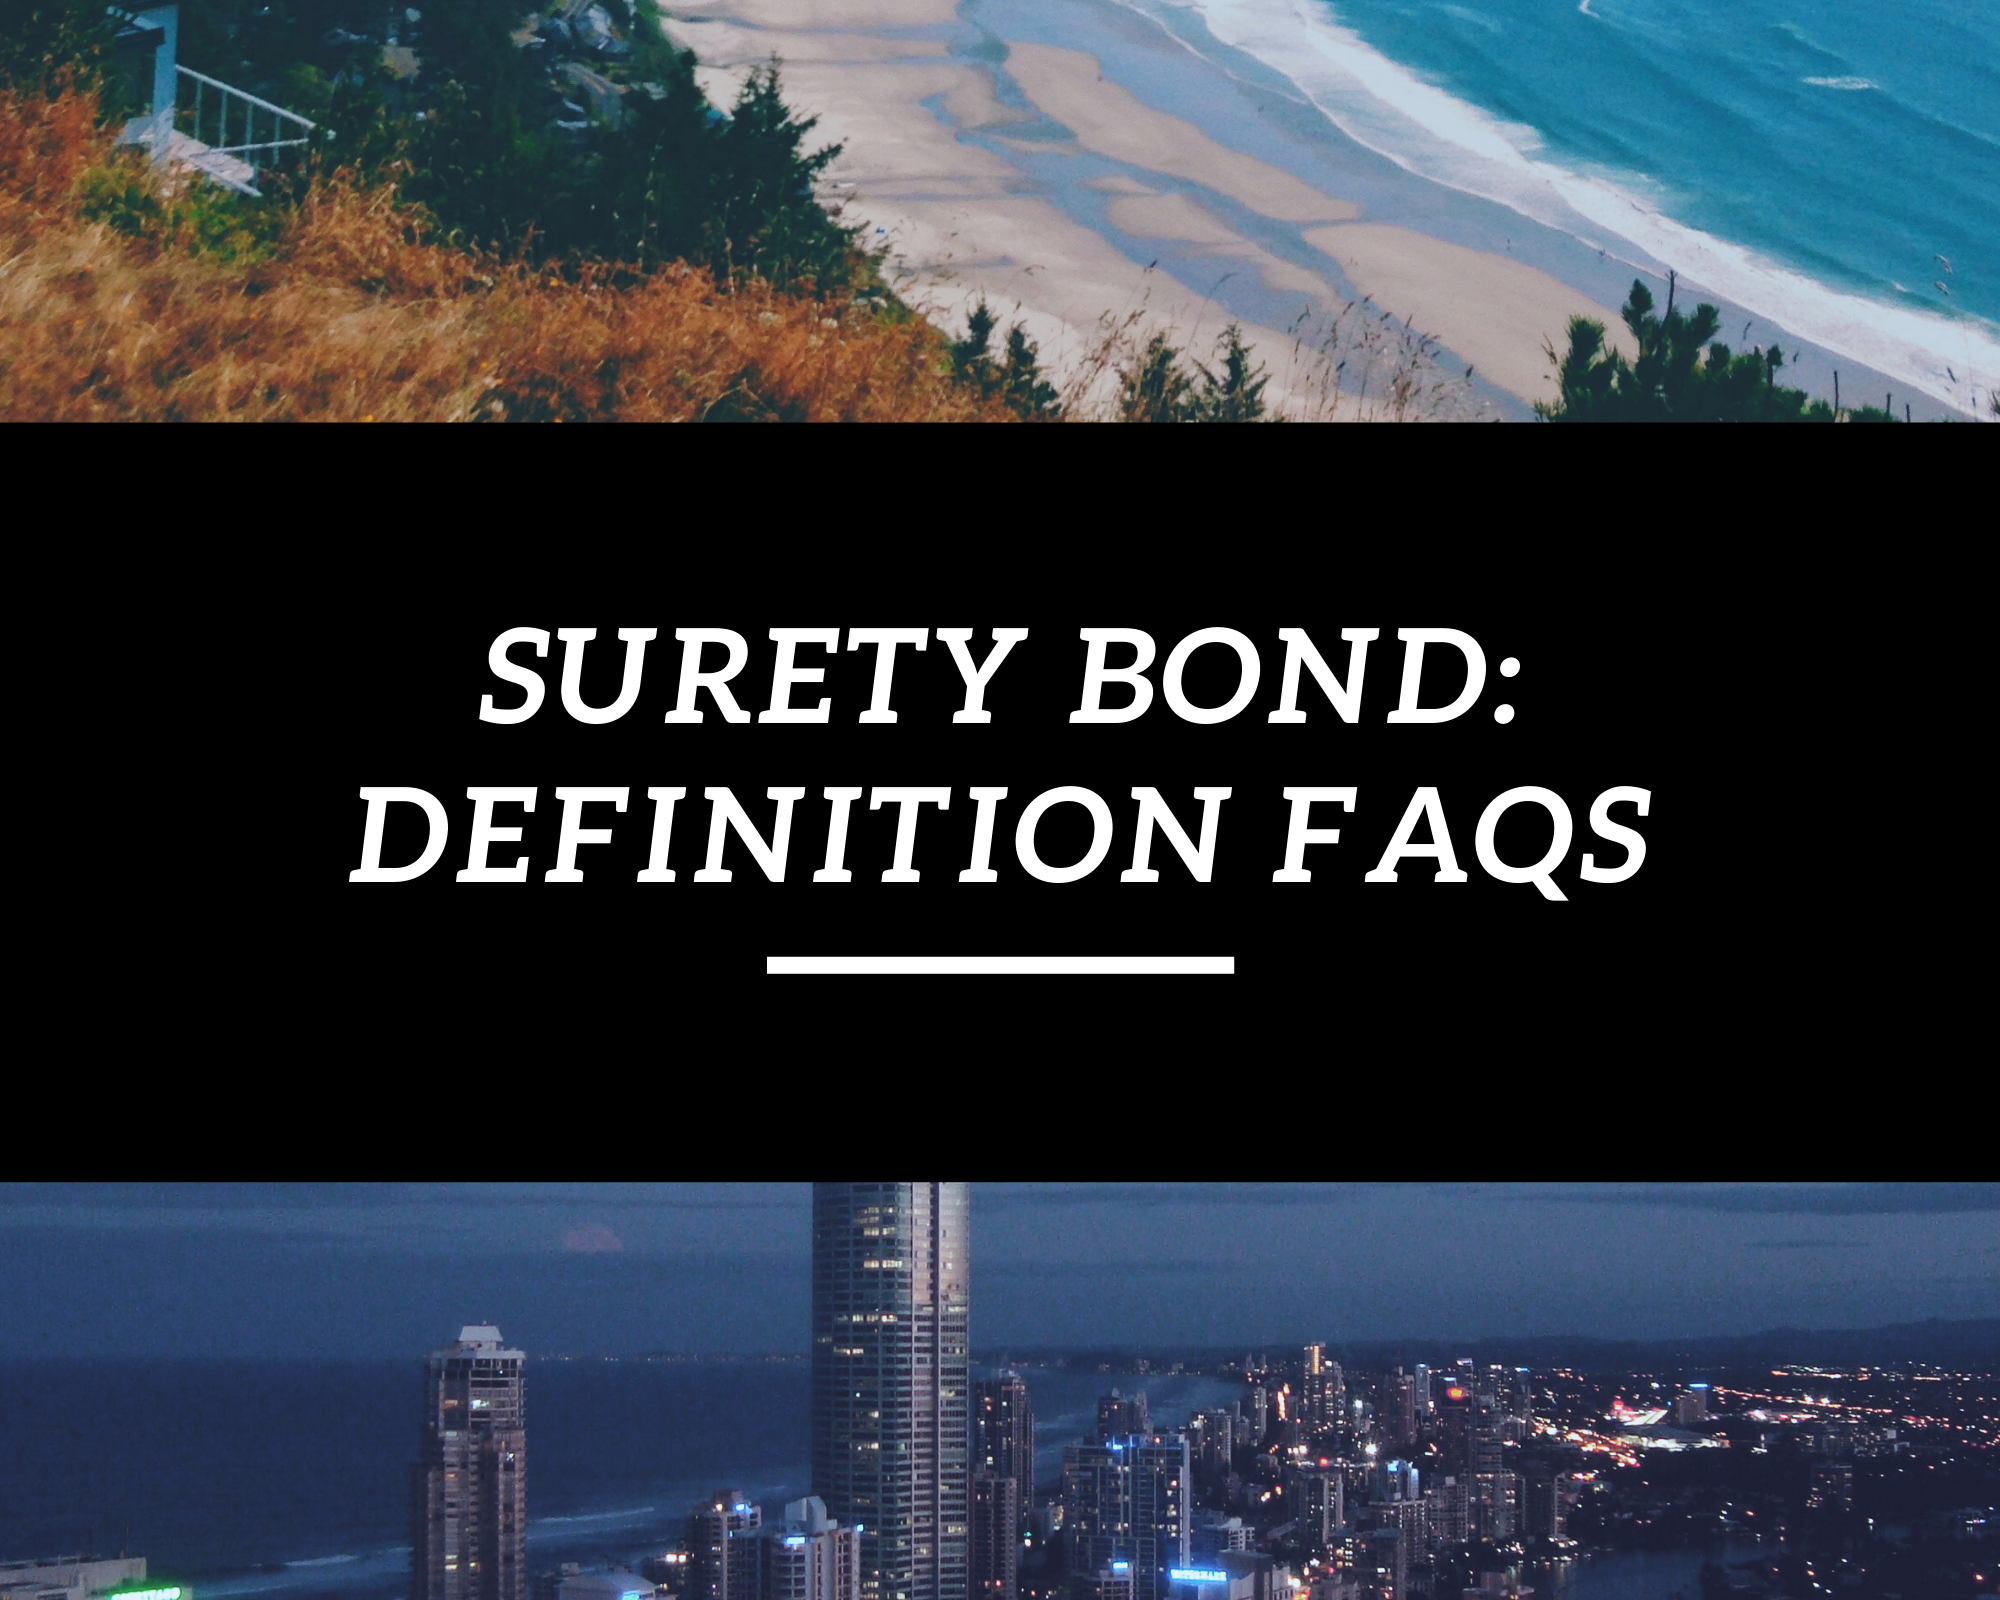 surety bond - what is a surety bond - city view and nature